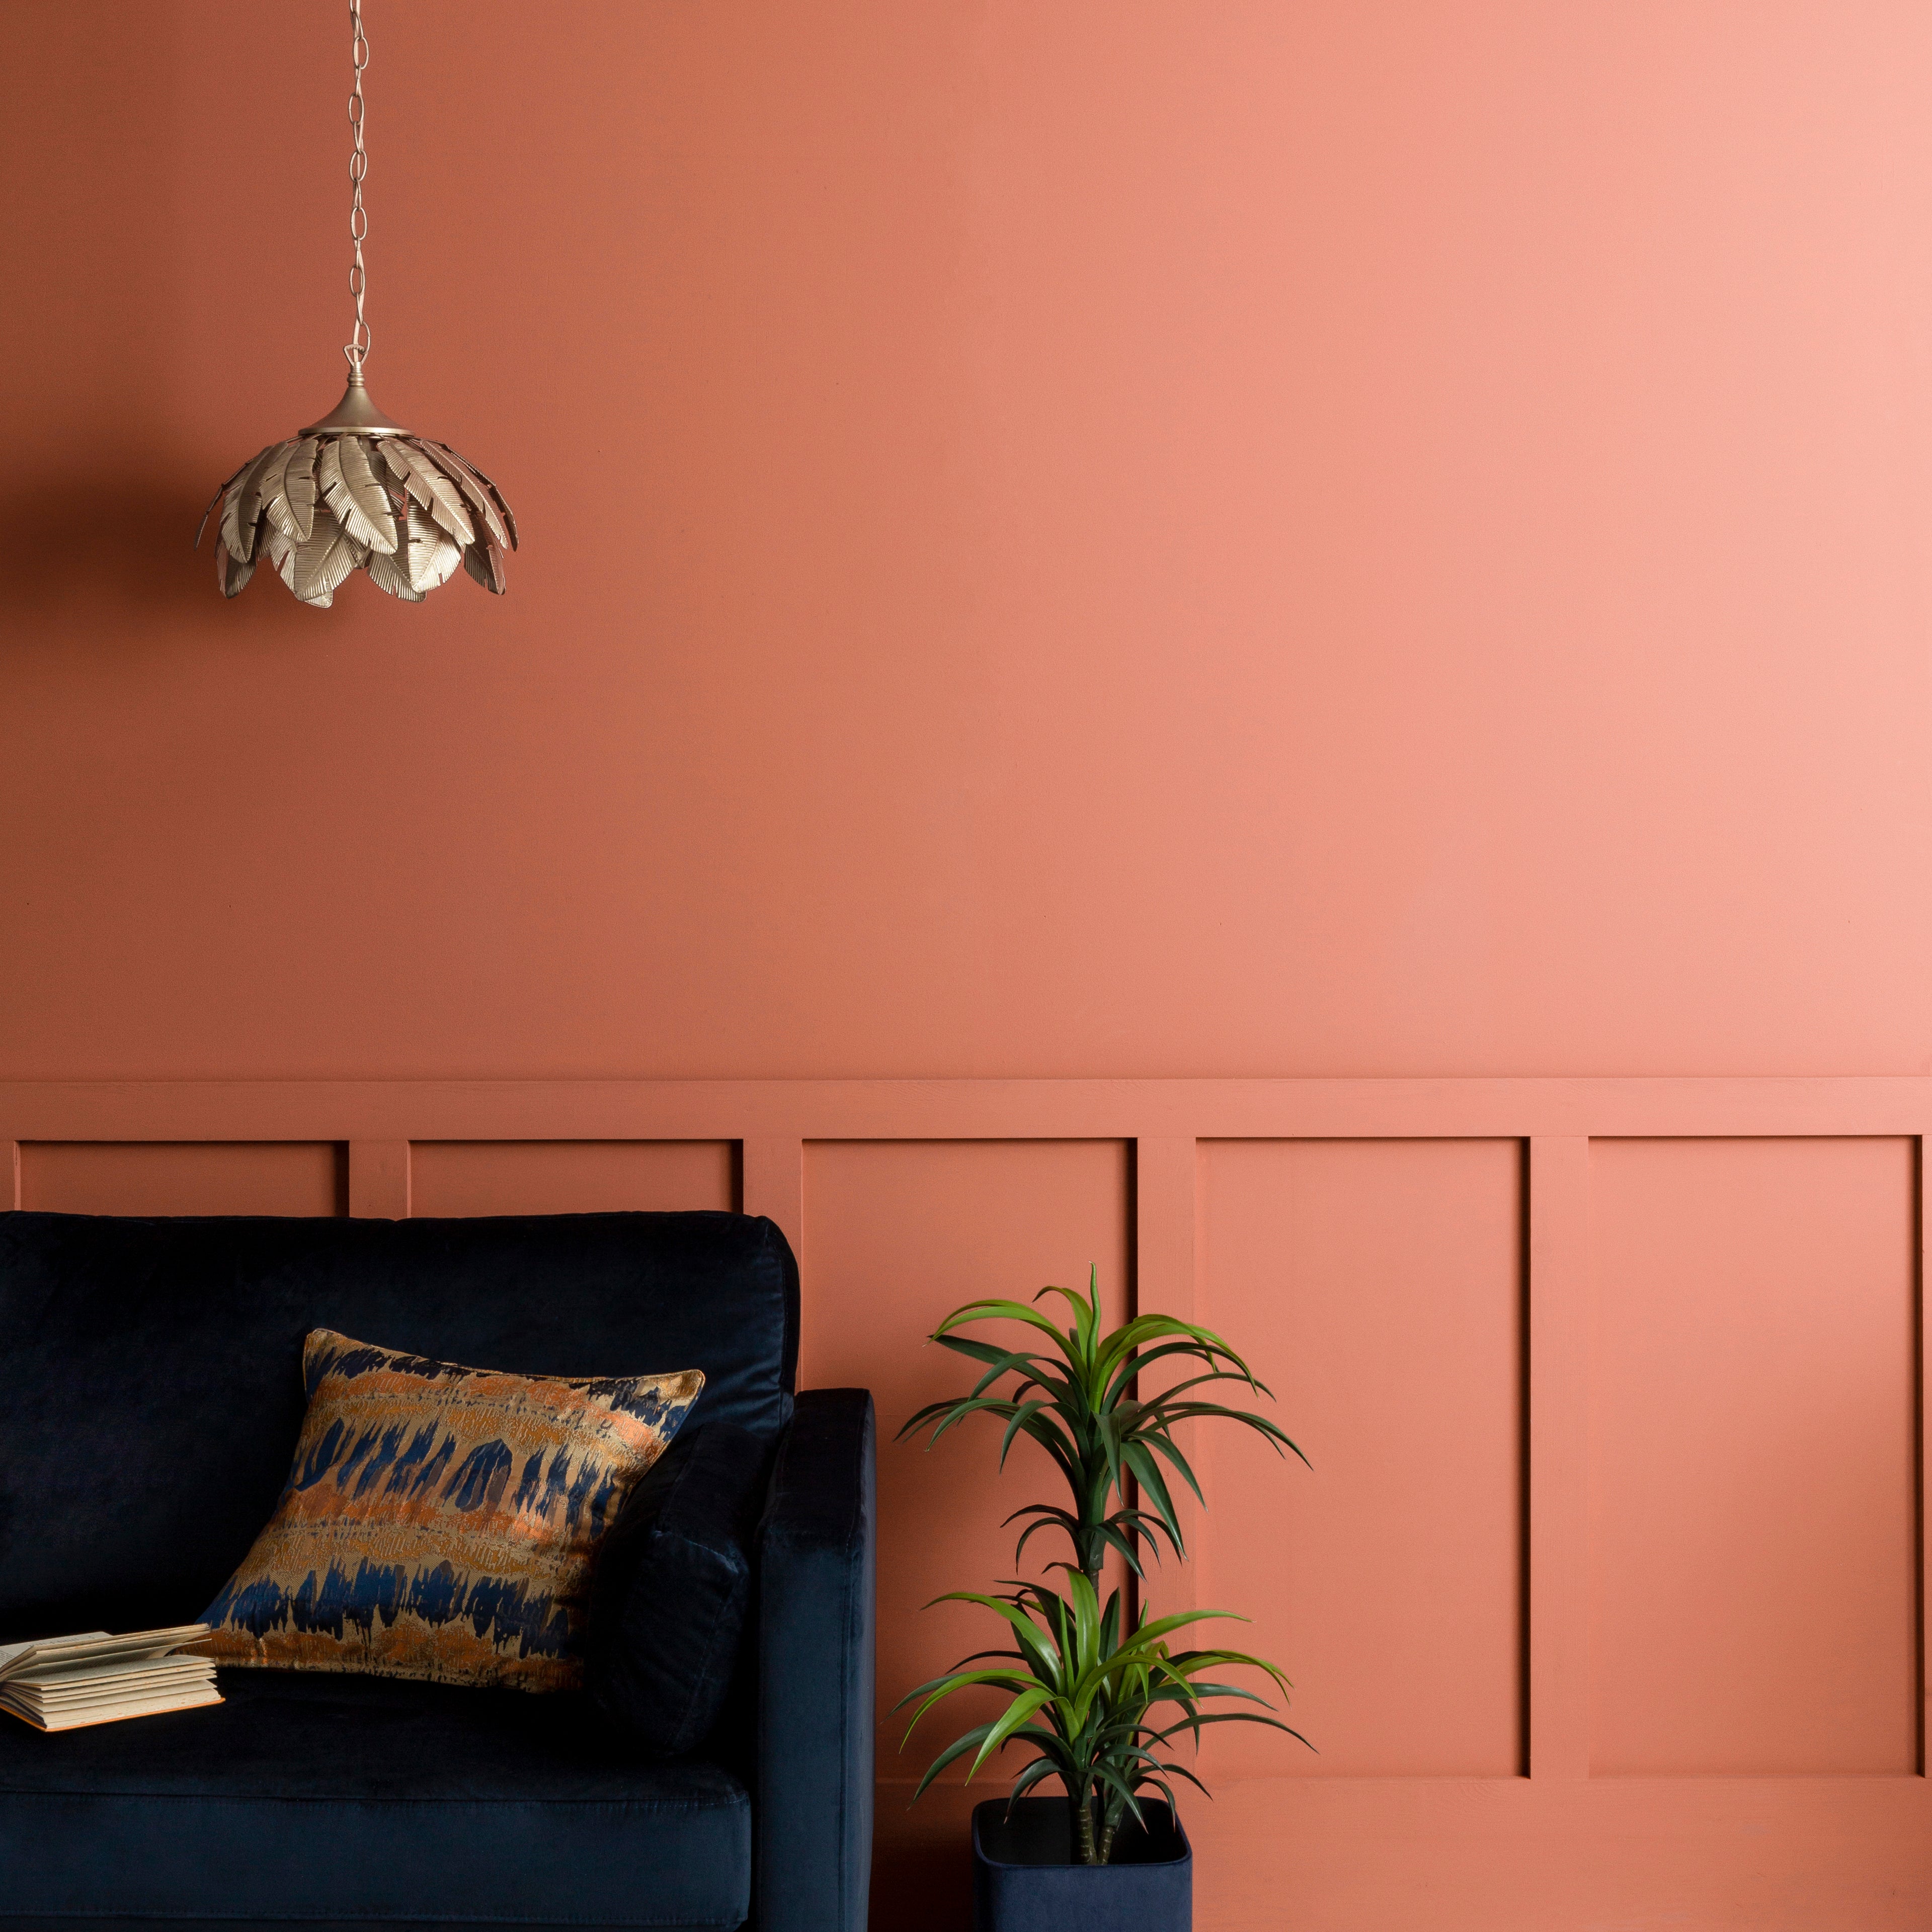 Terracotta Color: What Is It And How Do You Use It?